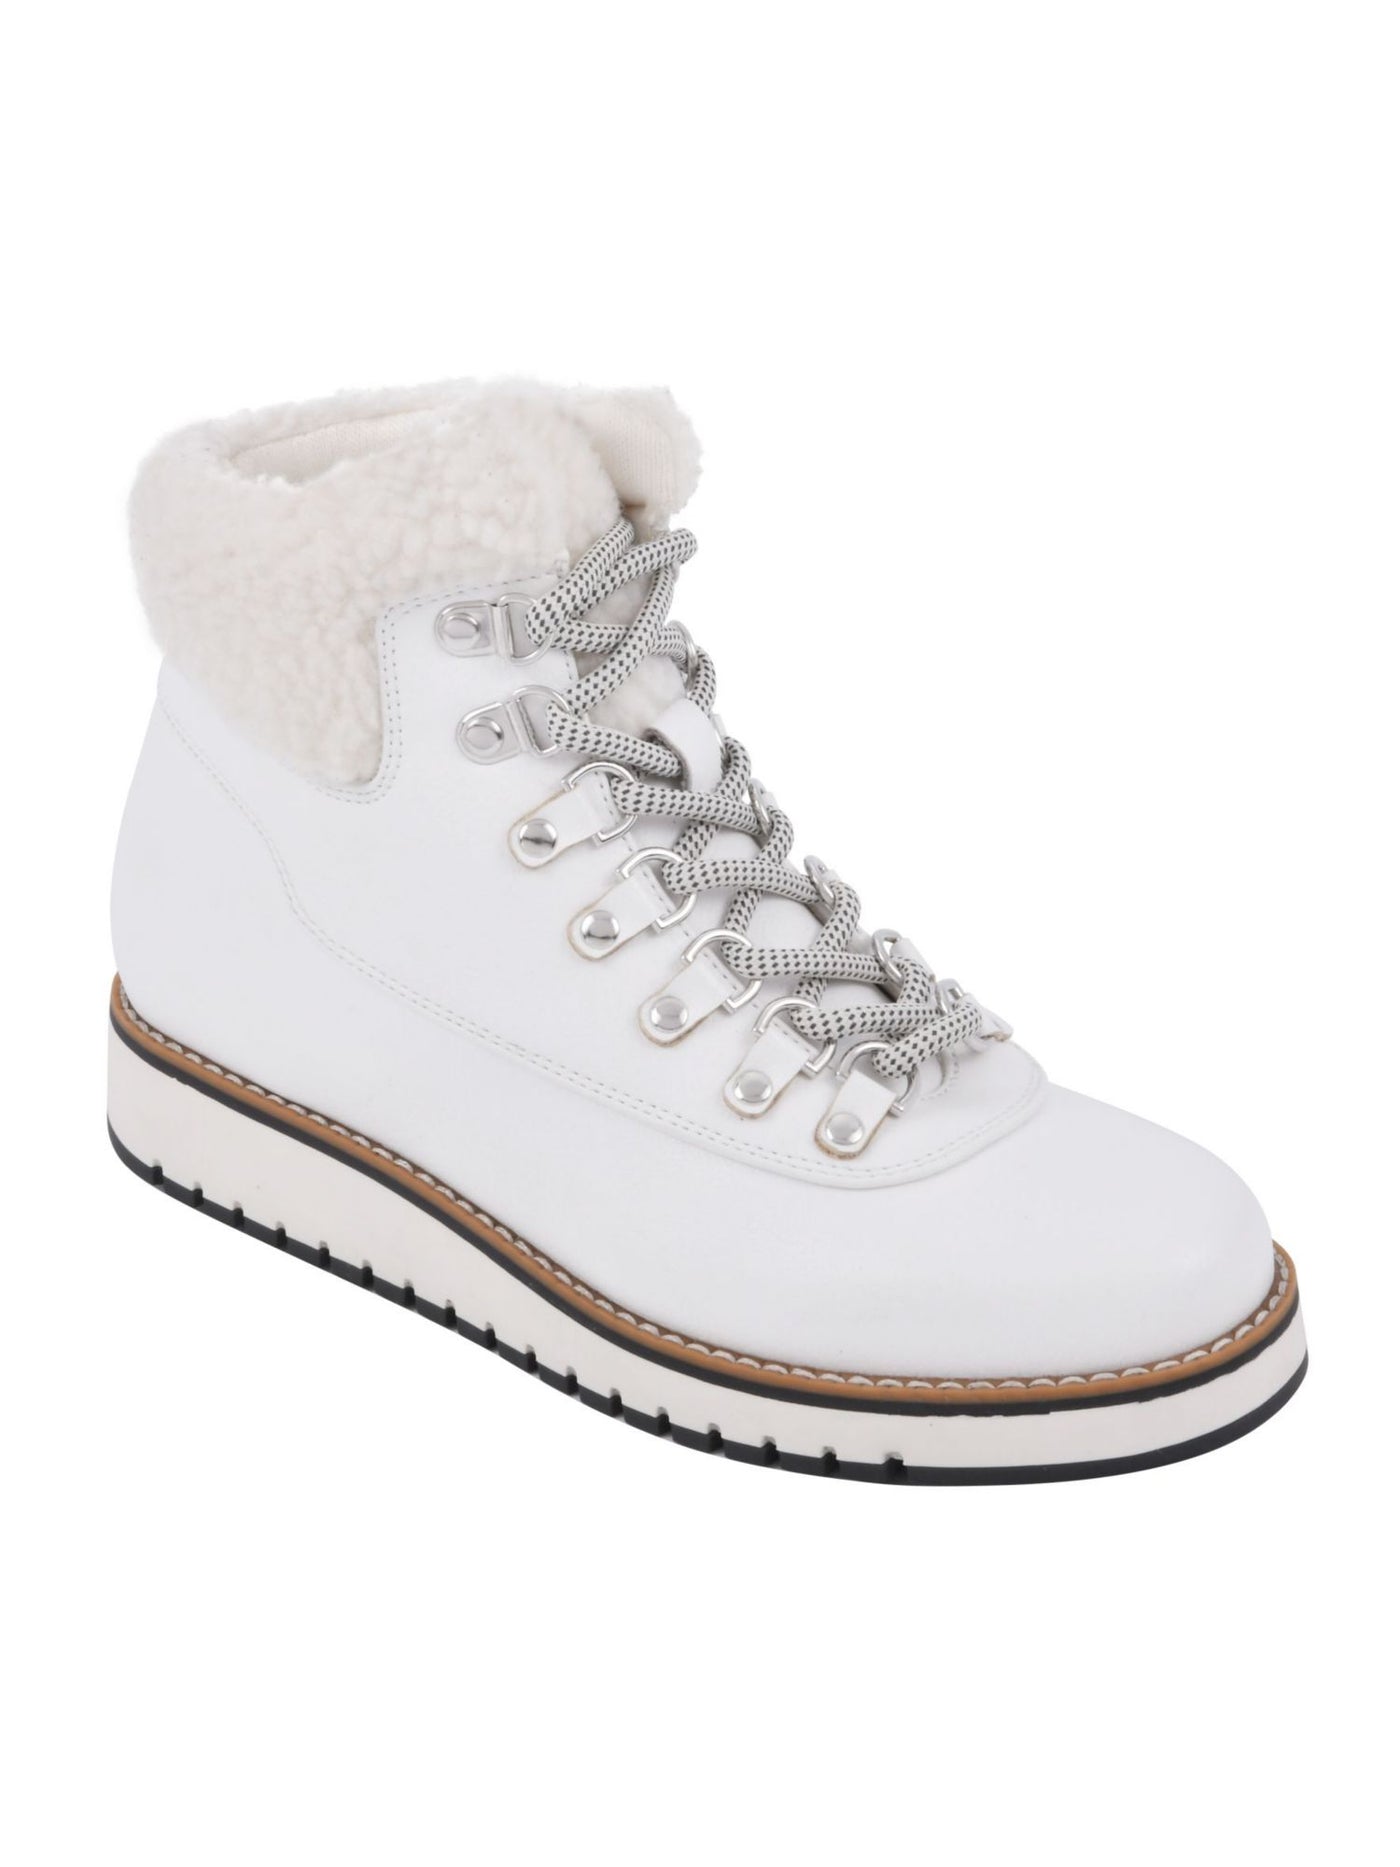 WHITE MOUNTAIN Womens White Plush Collar Water Resistant Cushioned Cozy Round Toe Wedge Lace-Up Boots Shoes 11 W